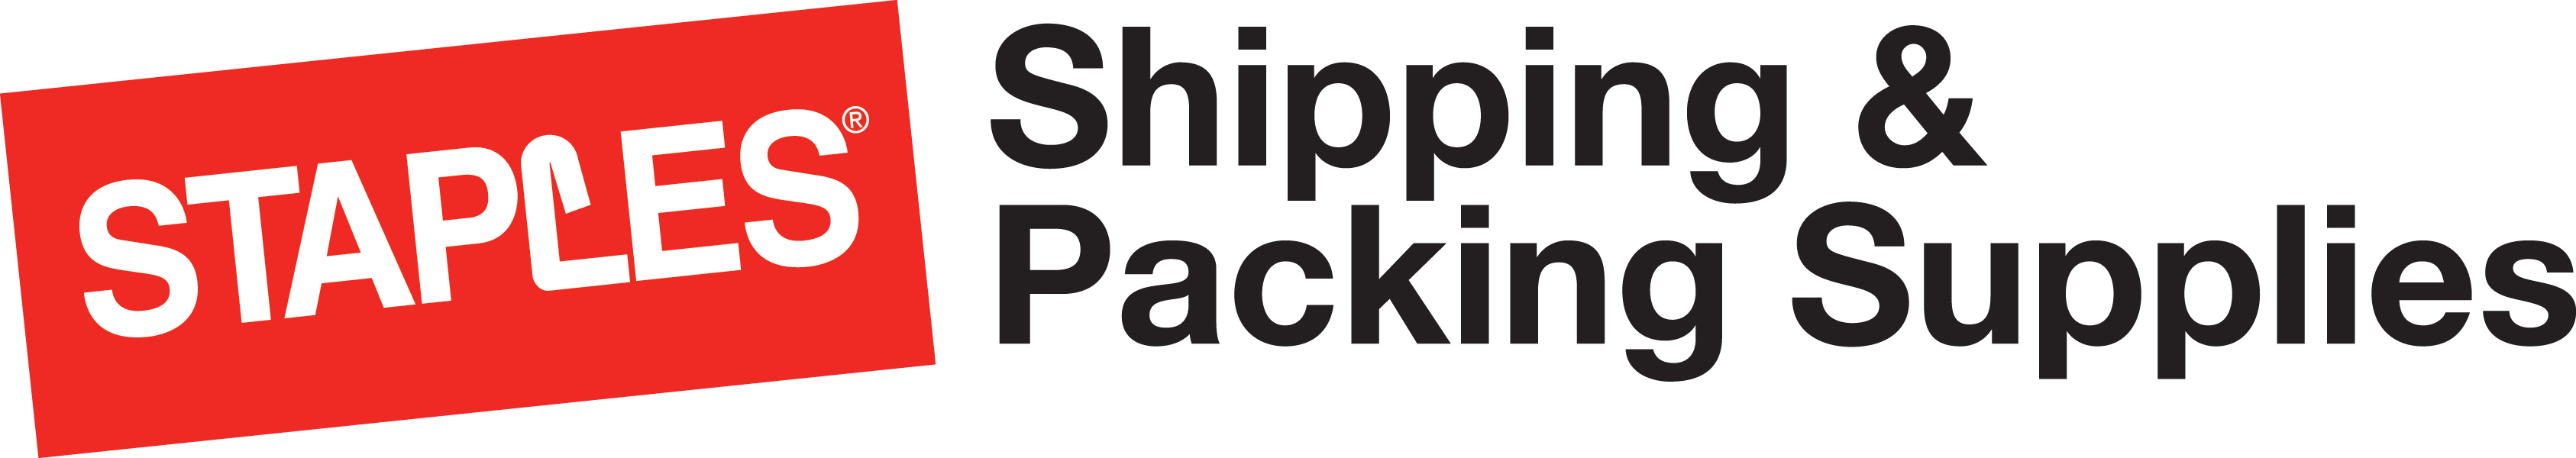 staples shipping